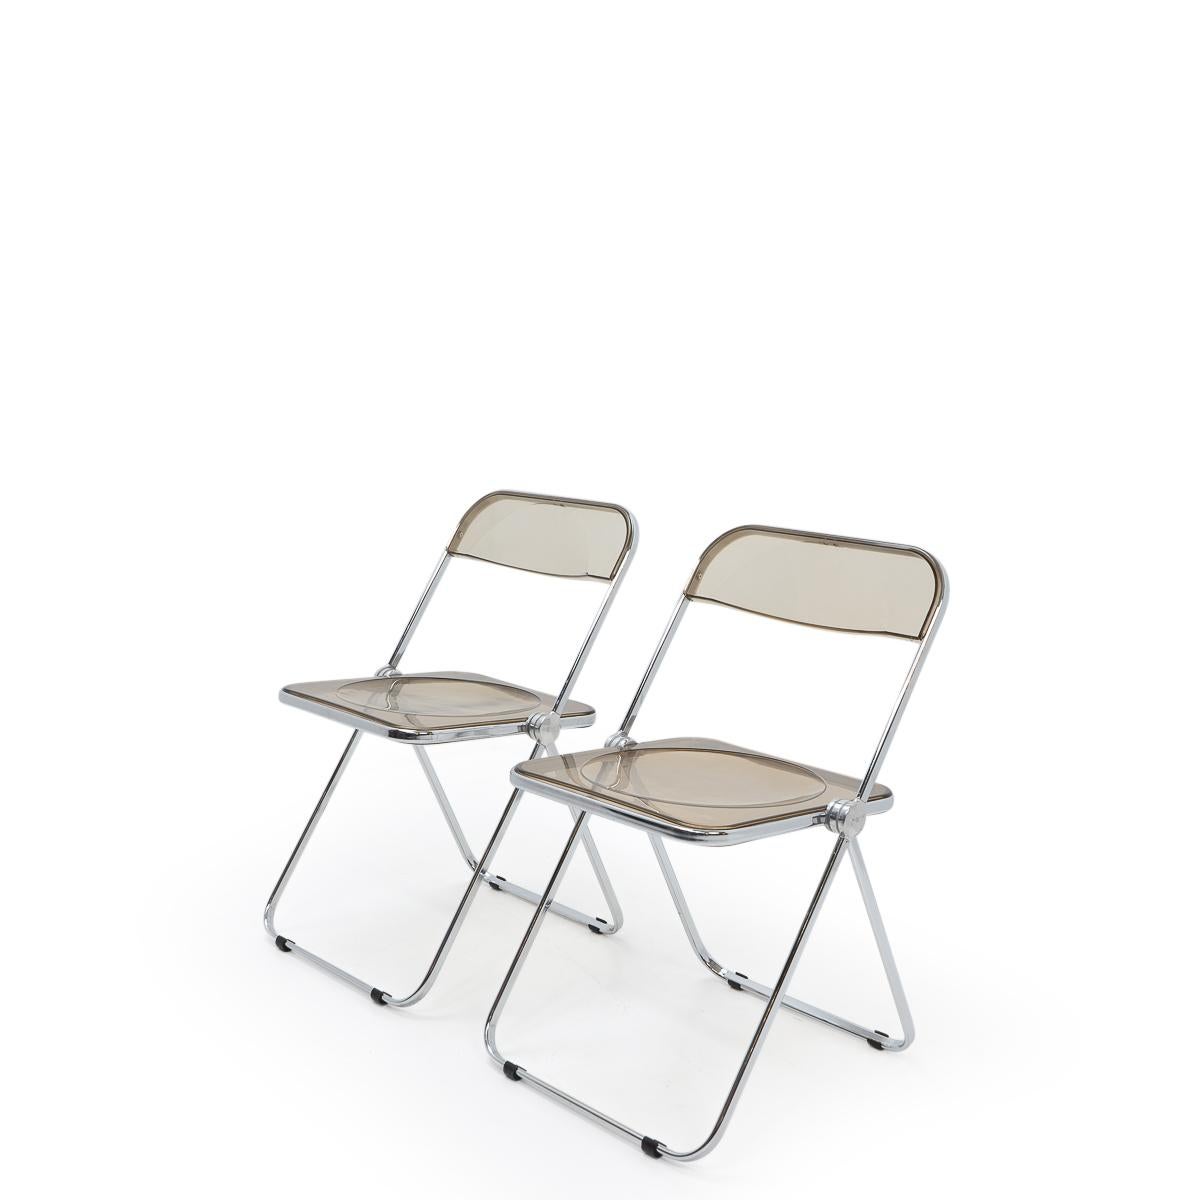 the history of the folding chair